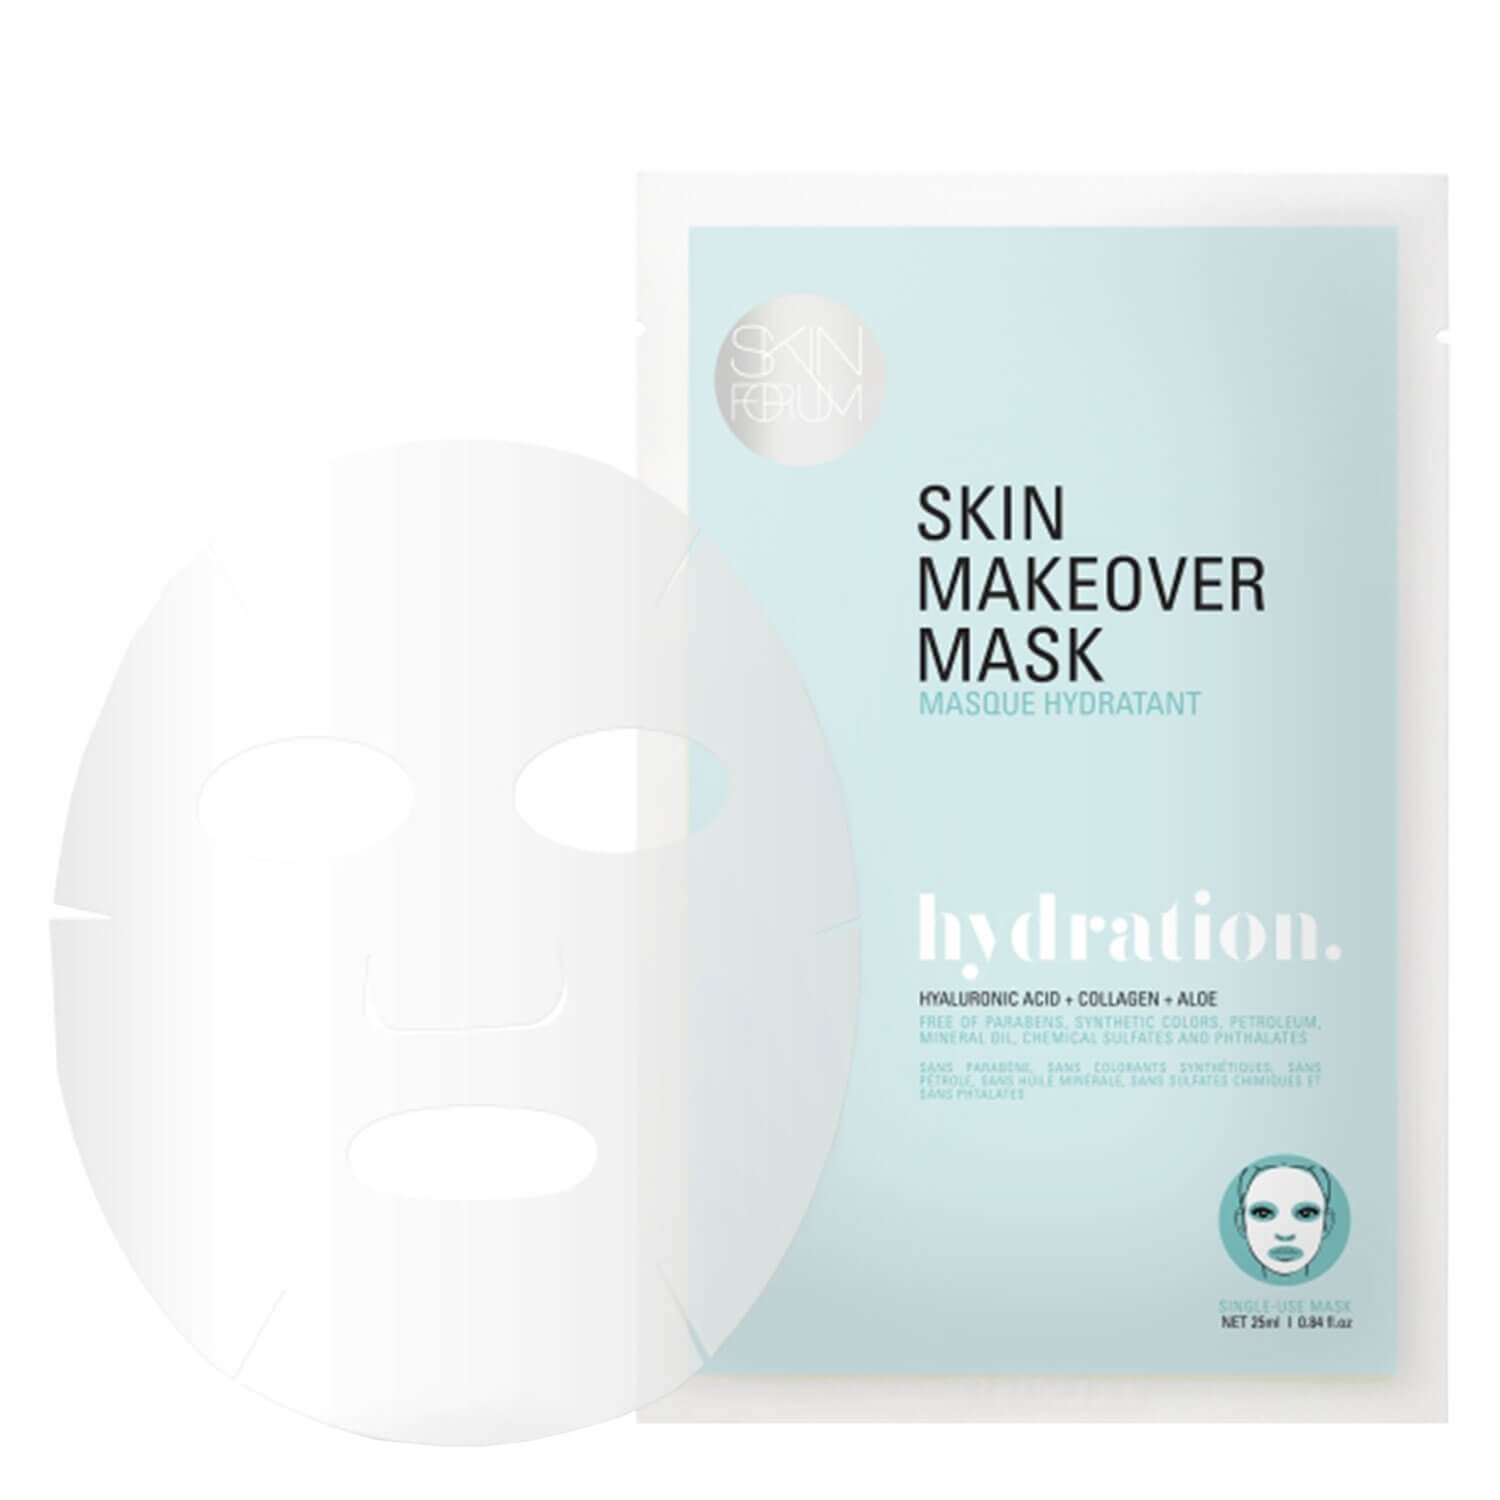 Product image from VOESH New York - Skin Makeover Mask hydration